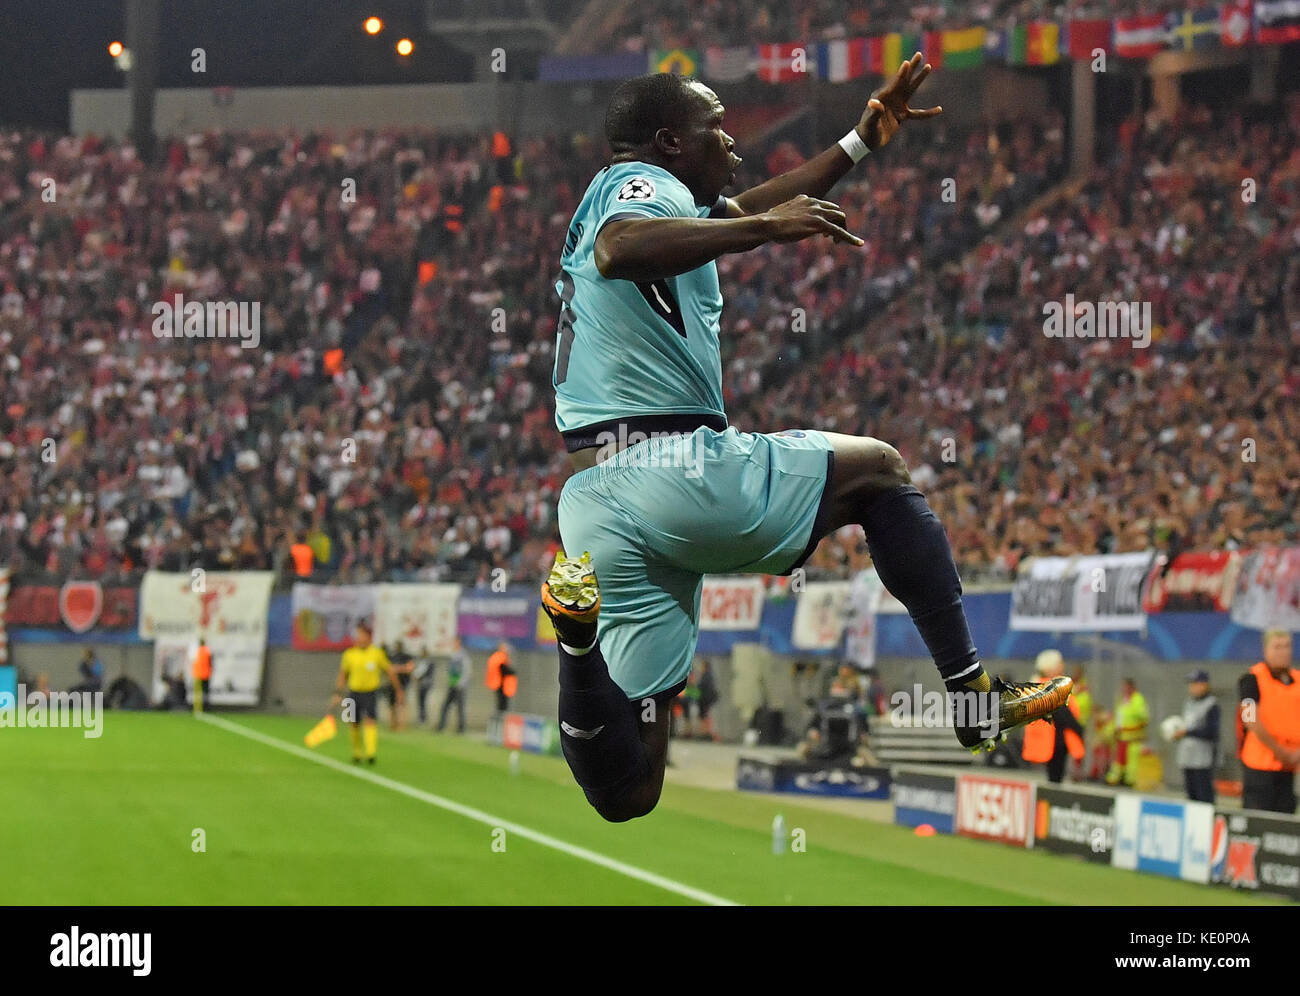 Leipzig, Germany. 17th Oct, 2017. Porto's Vincent Aboubakar celebrates after scoring an equaliser during the Champions League group stages qualification match between RB Leipzig and FC Porto in the Red Bull Arena in Leipzig, Germany, 17 October 2017. Credit: Hendrik Schmidt/dpa-Zentralbild/ZB/dpa/Alamy Live News Stock Photo